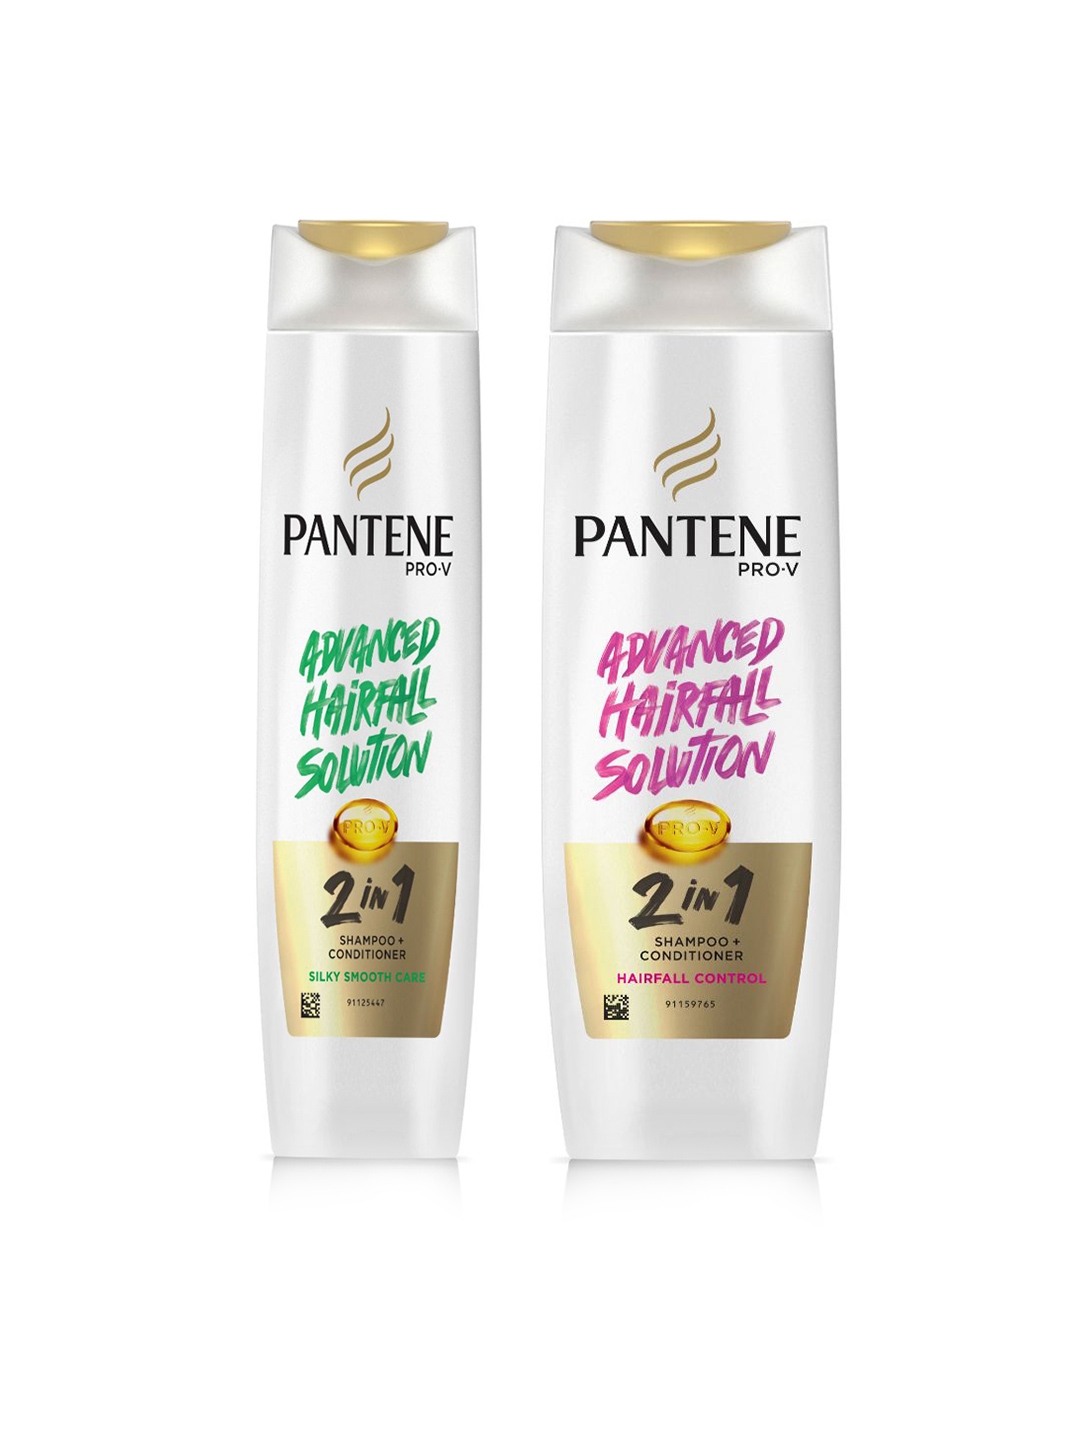 Pantene Set of 2 Advanced Hair Fall Solution 2 in 1 Shampoo + Conditioner